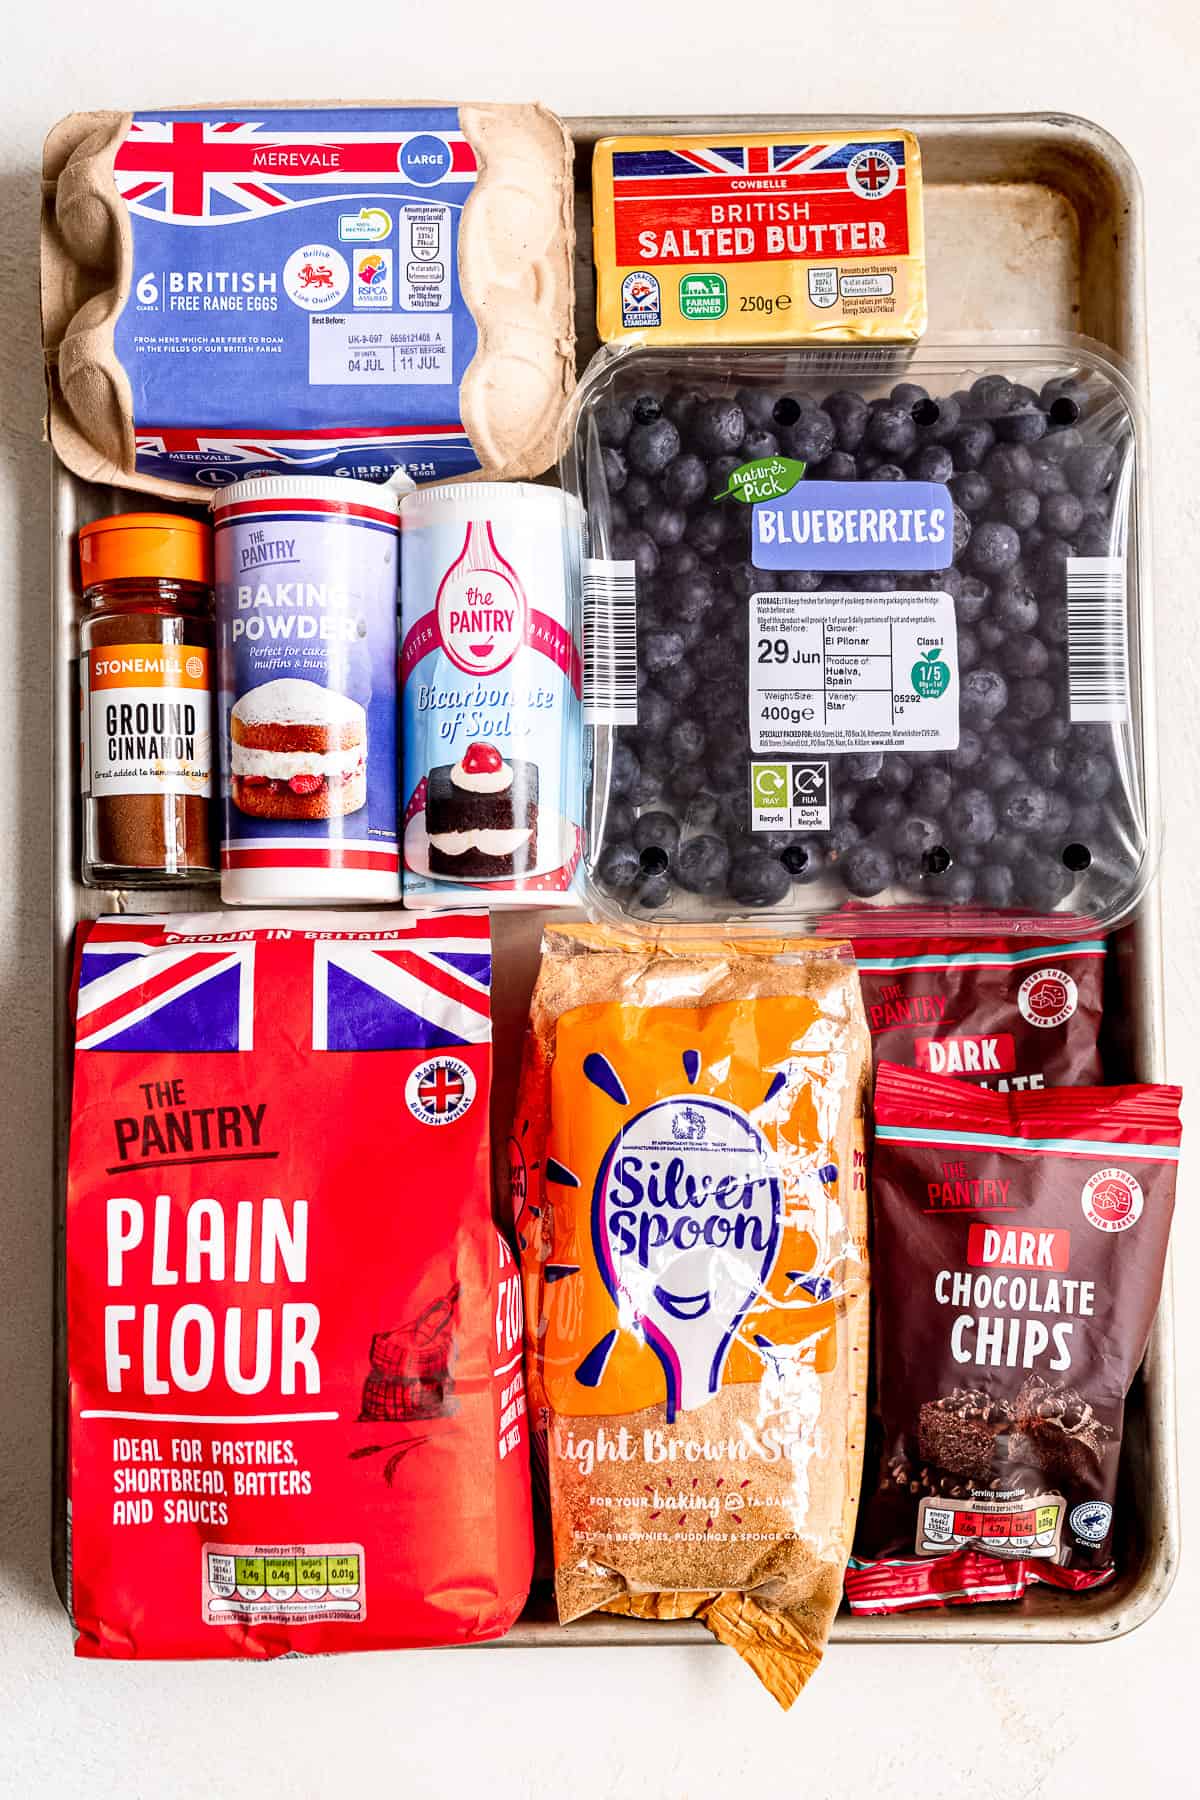 Aldi ingredients for making chocolate muffins with blueberries.